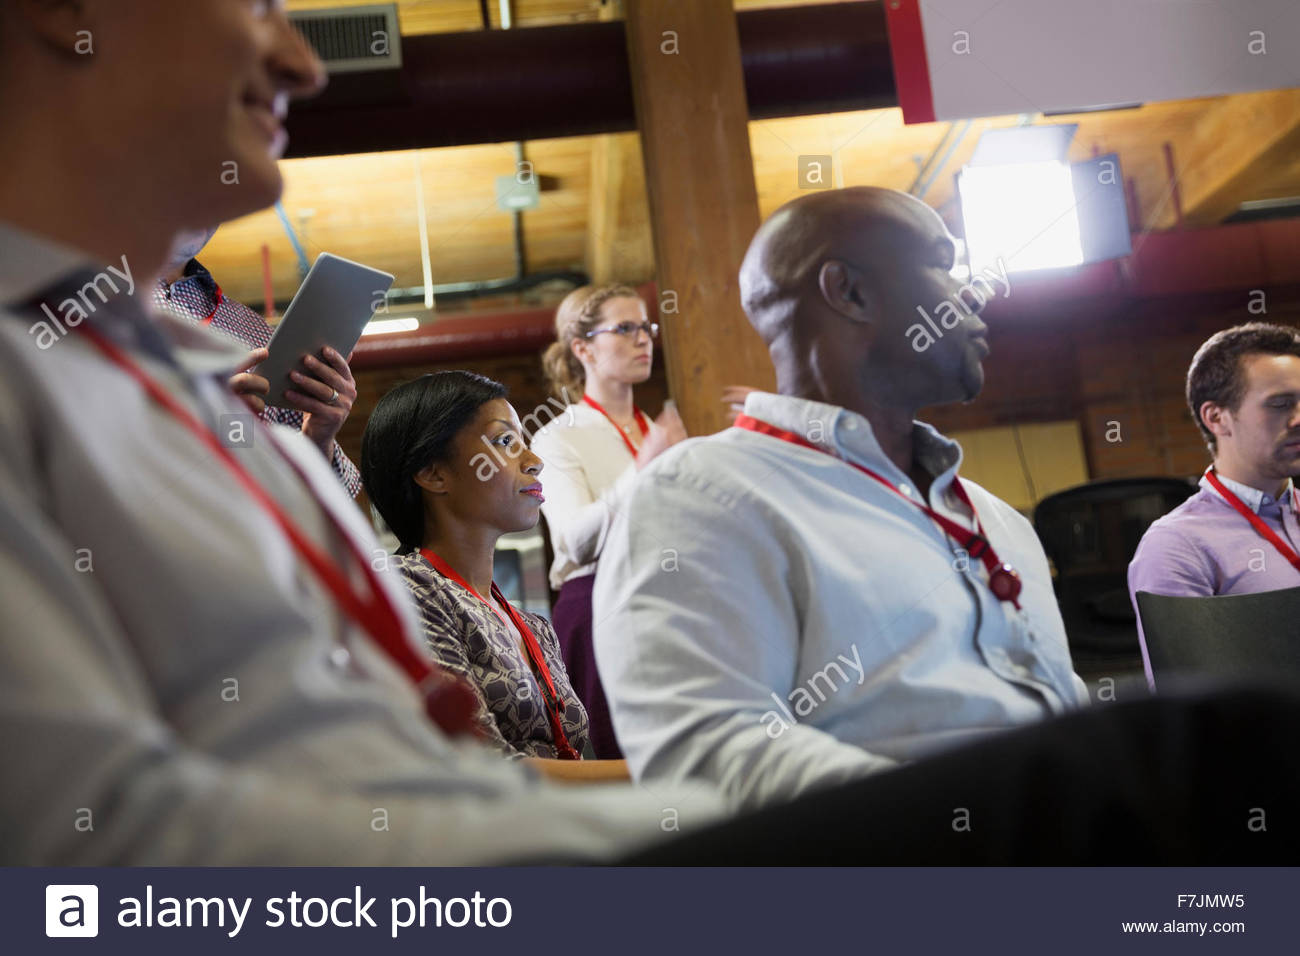 Business people in conference audience Stock Photo